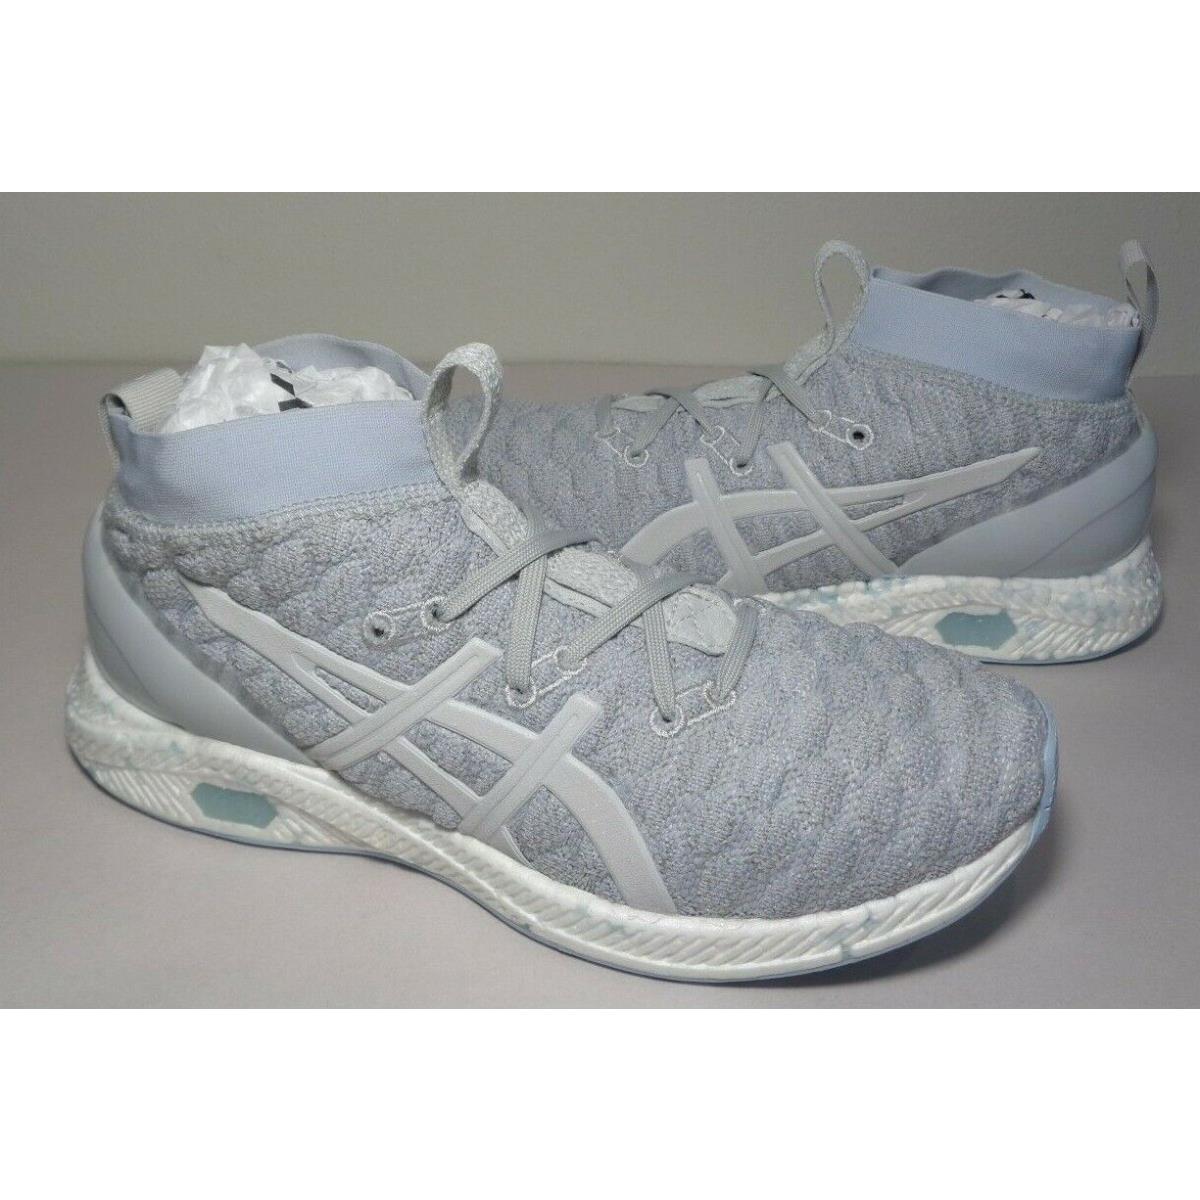 Asics Size 8 Hypergel Kan Glacier Grey Knit Running Sneakers Womens Shoes